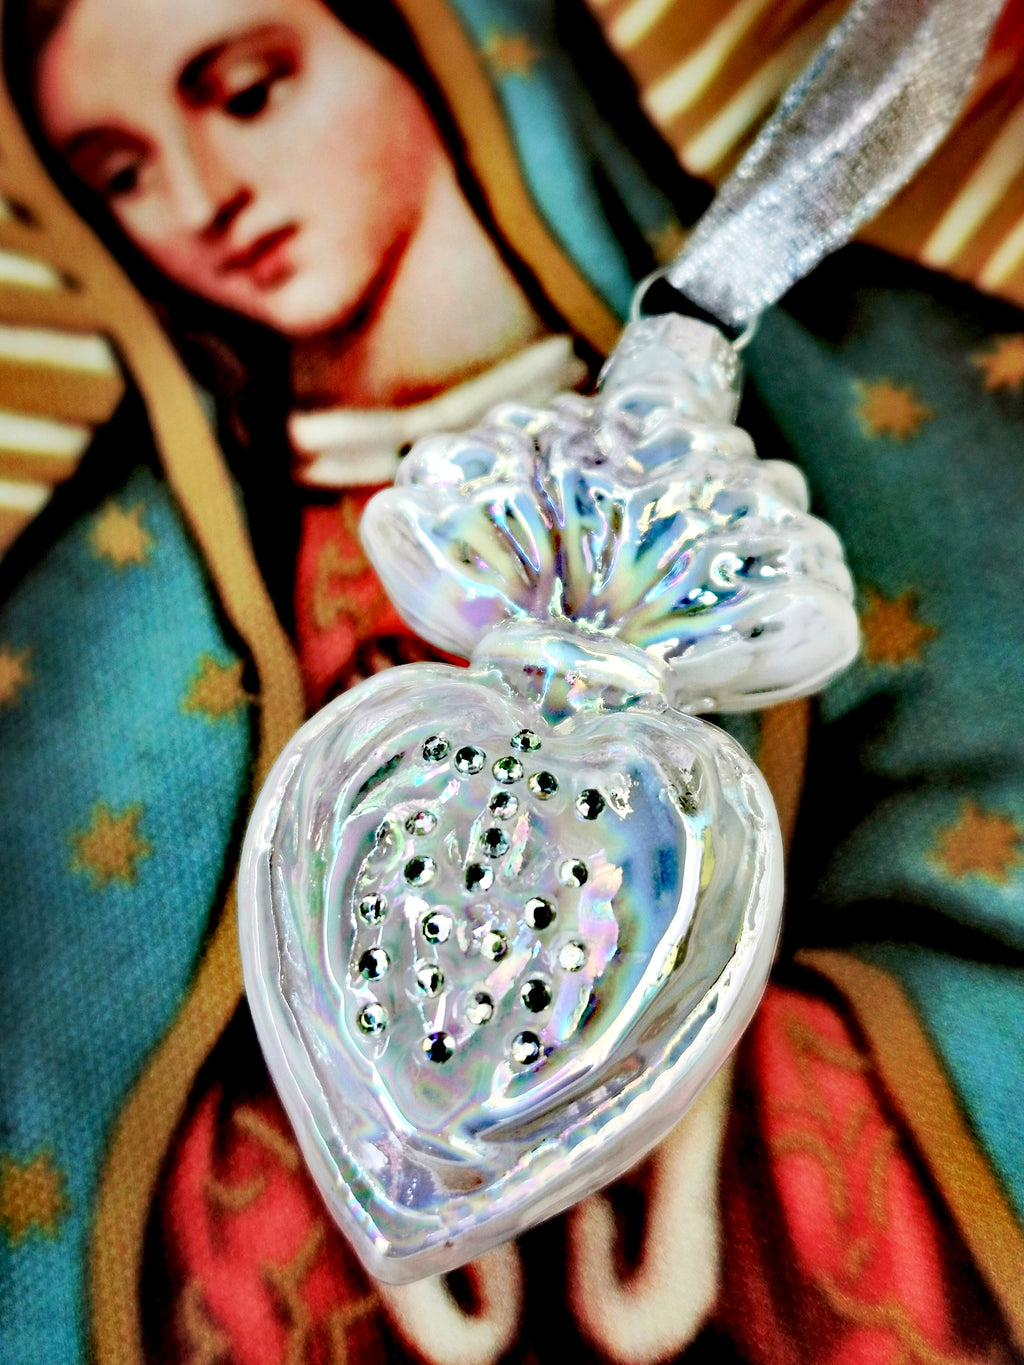 Sweet lustre sacred heart christmas decoration. This fantastic sacred heart ornament will bring some catholic christmas glitz to your Christmas tree or festive holiday display.

Hand-painted glass decoration 

Size 8.5cm x 4cm x 2cm

Fragile, handle with care

